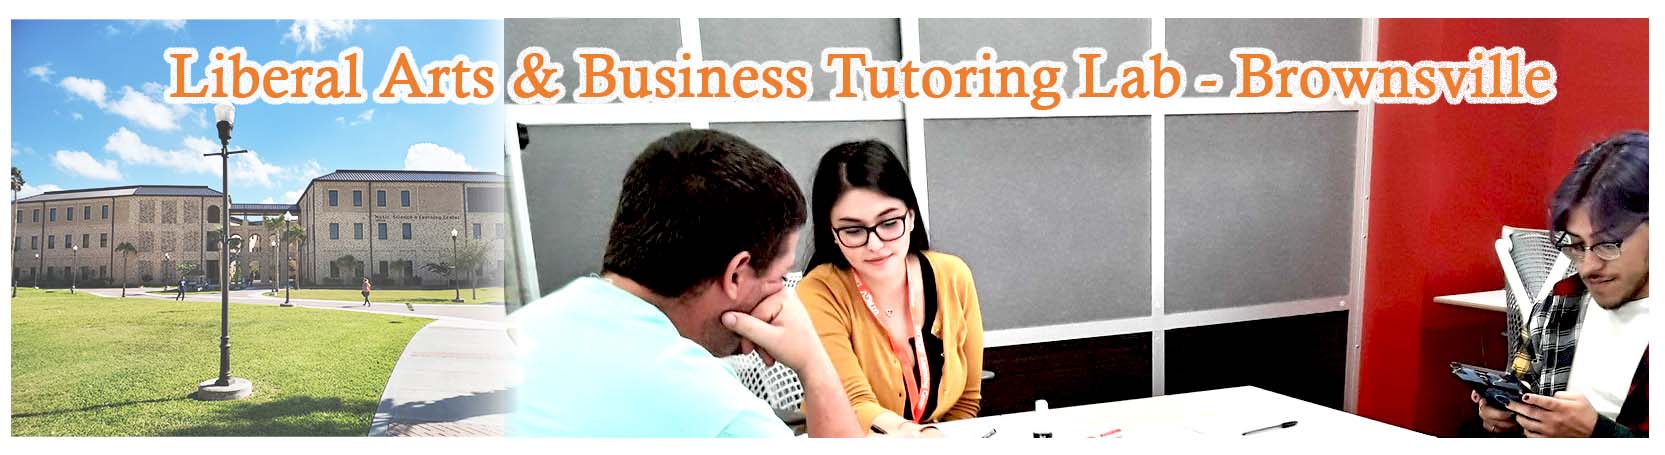 Liberal Arts and Business Tutoring Lab Brownsville